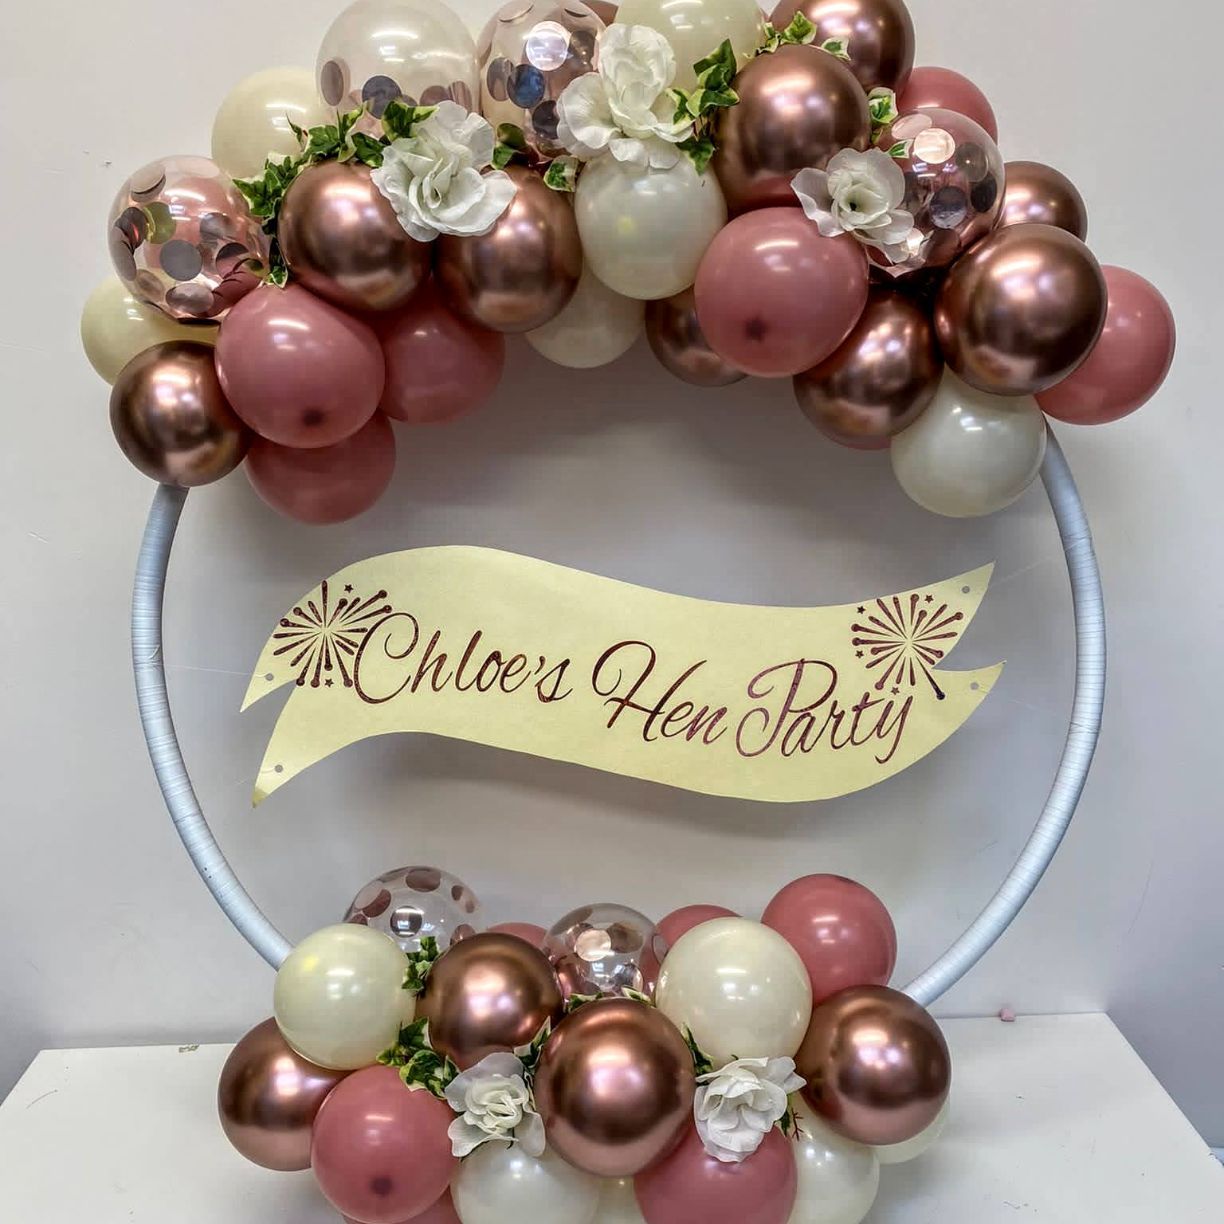 A balloon hoop with personalised banner for Chloes Hen Party in Rose Gold, Cream mini balloons and floral accesories all elegantly styled on a hoop shape